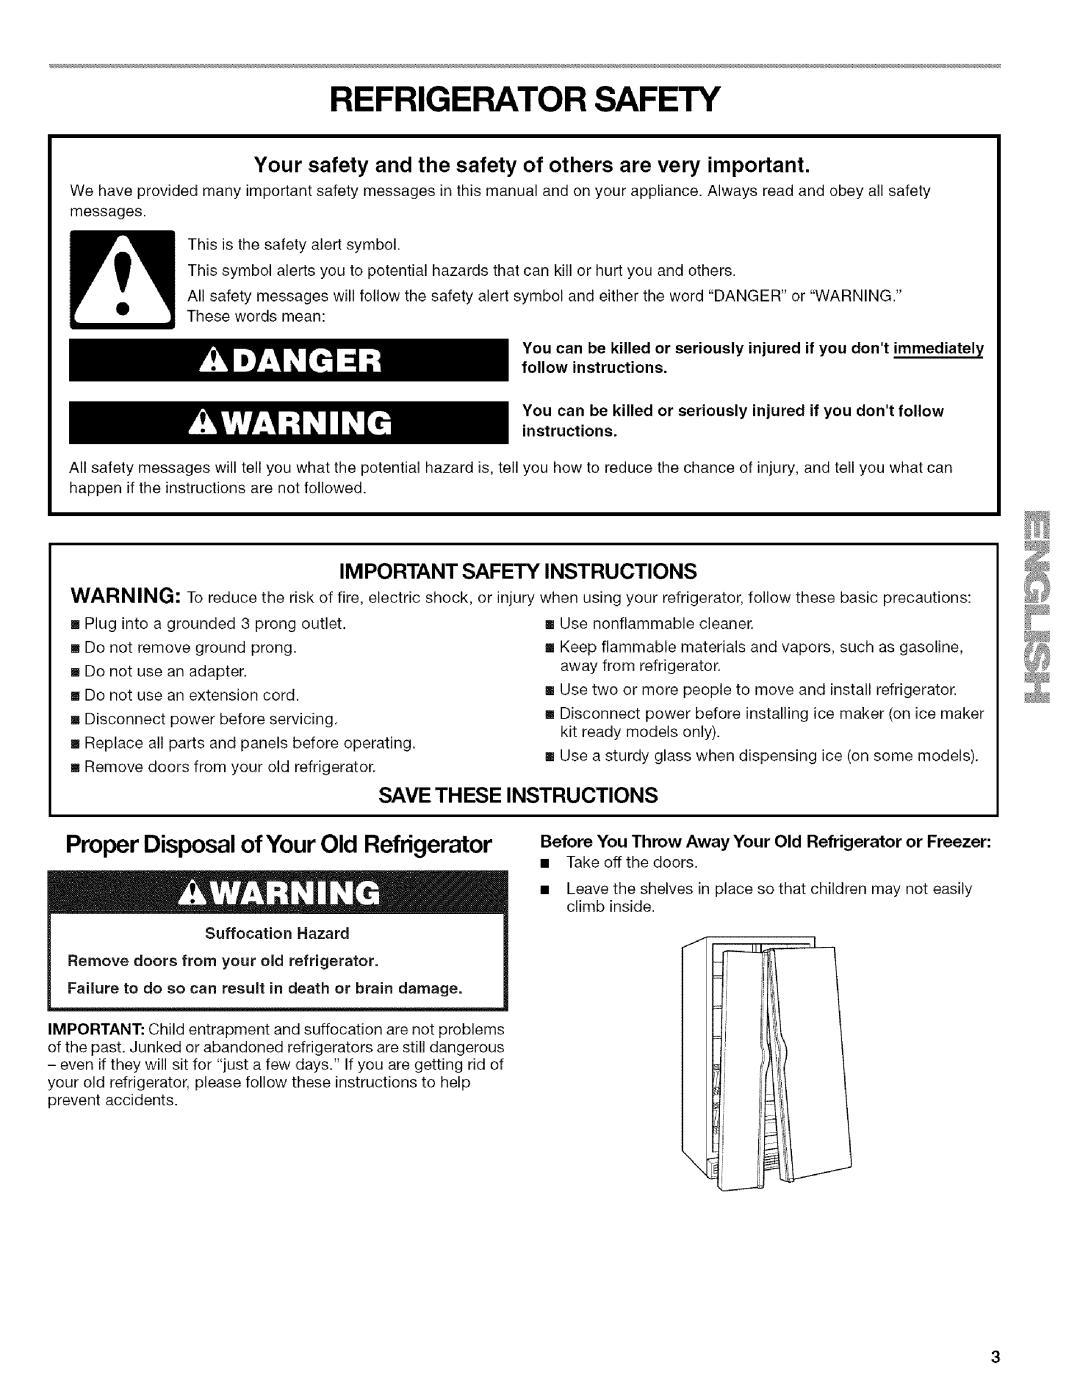 Kenmore WIOI67097A manual Refrigerator Safety, Proper Disposal of Your Old Refrigerator, Important Safety, Instructions 